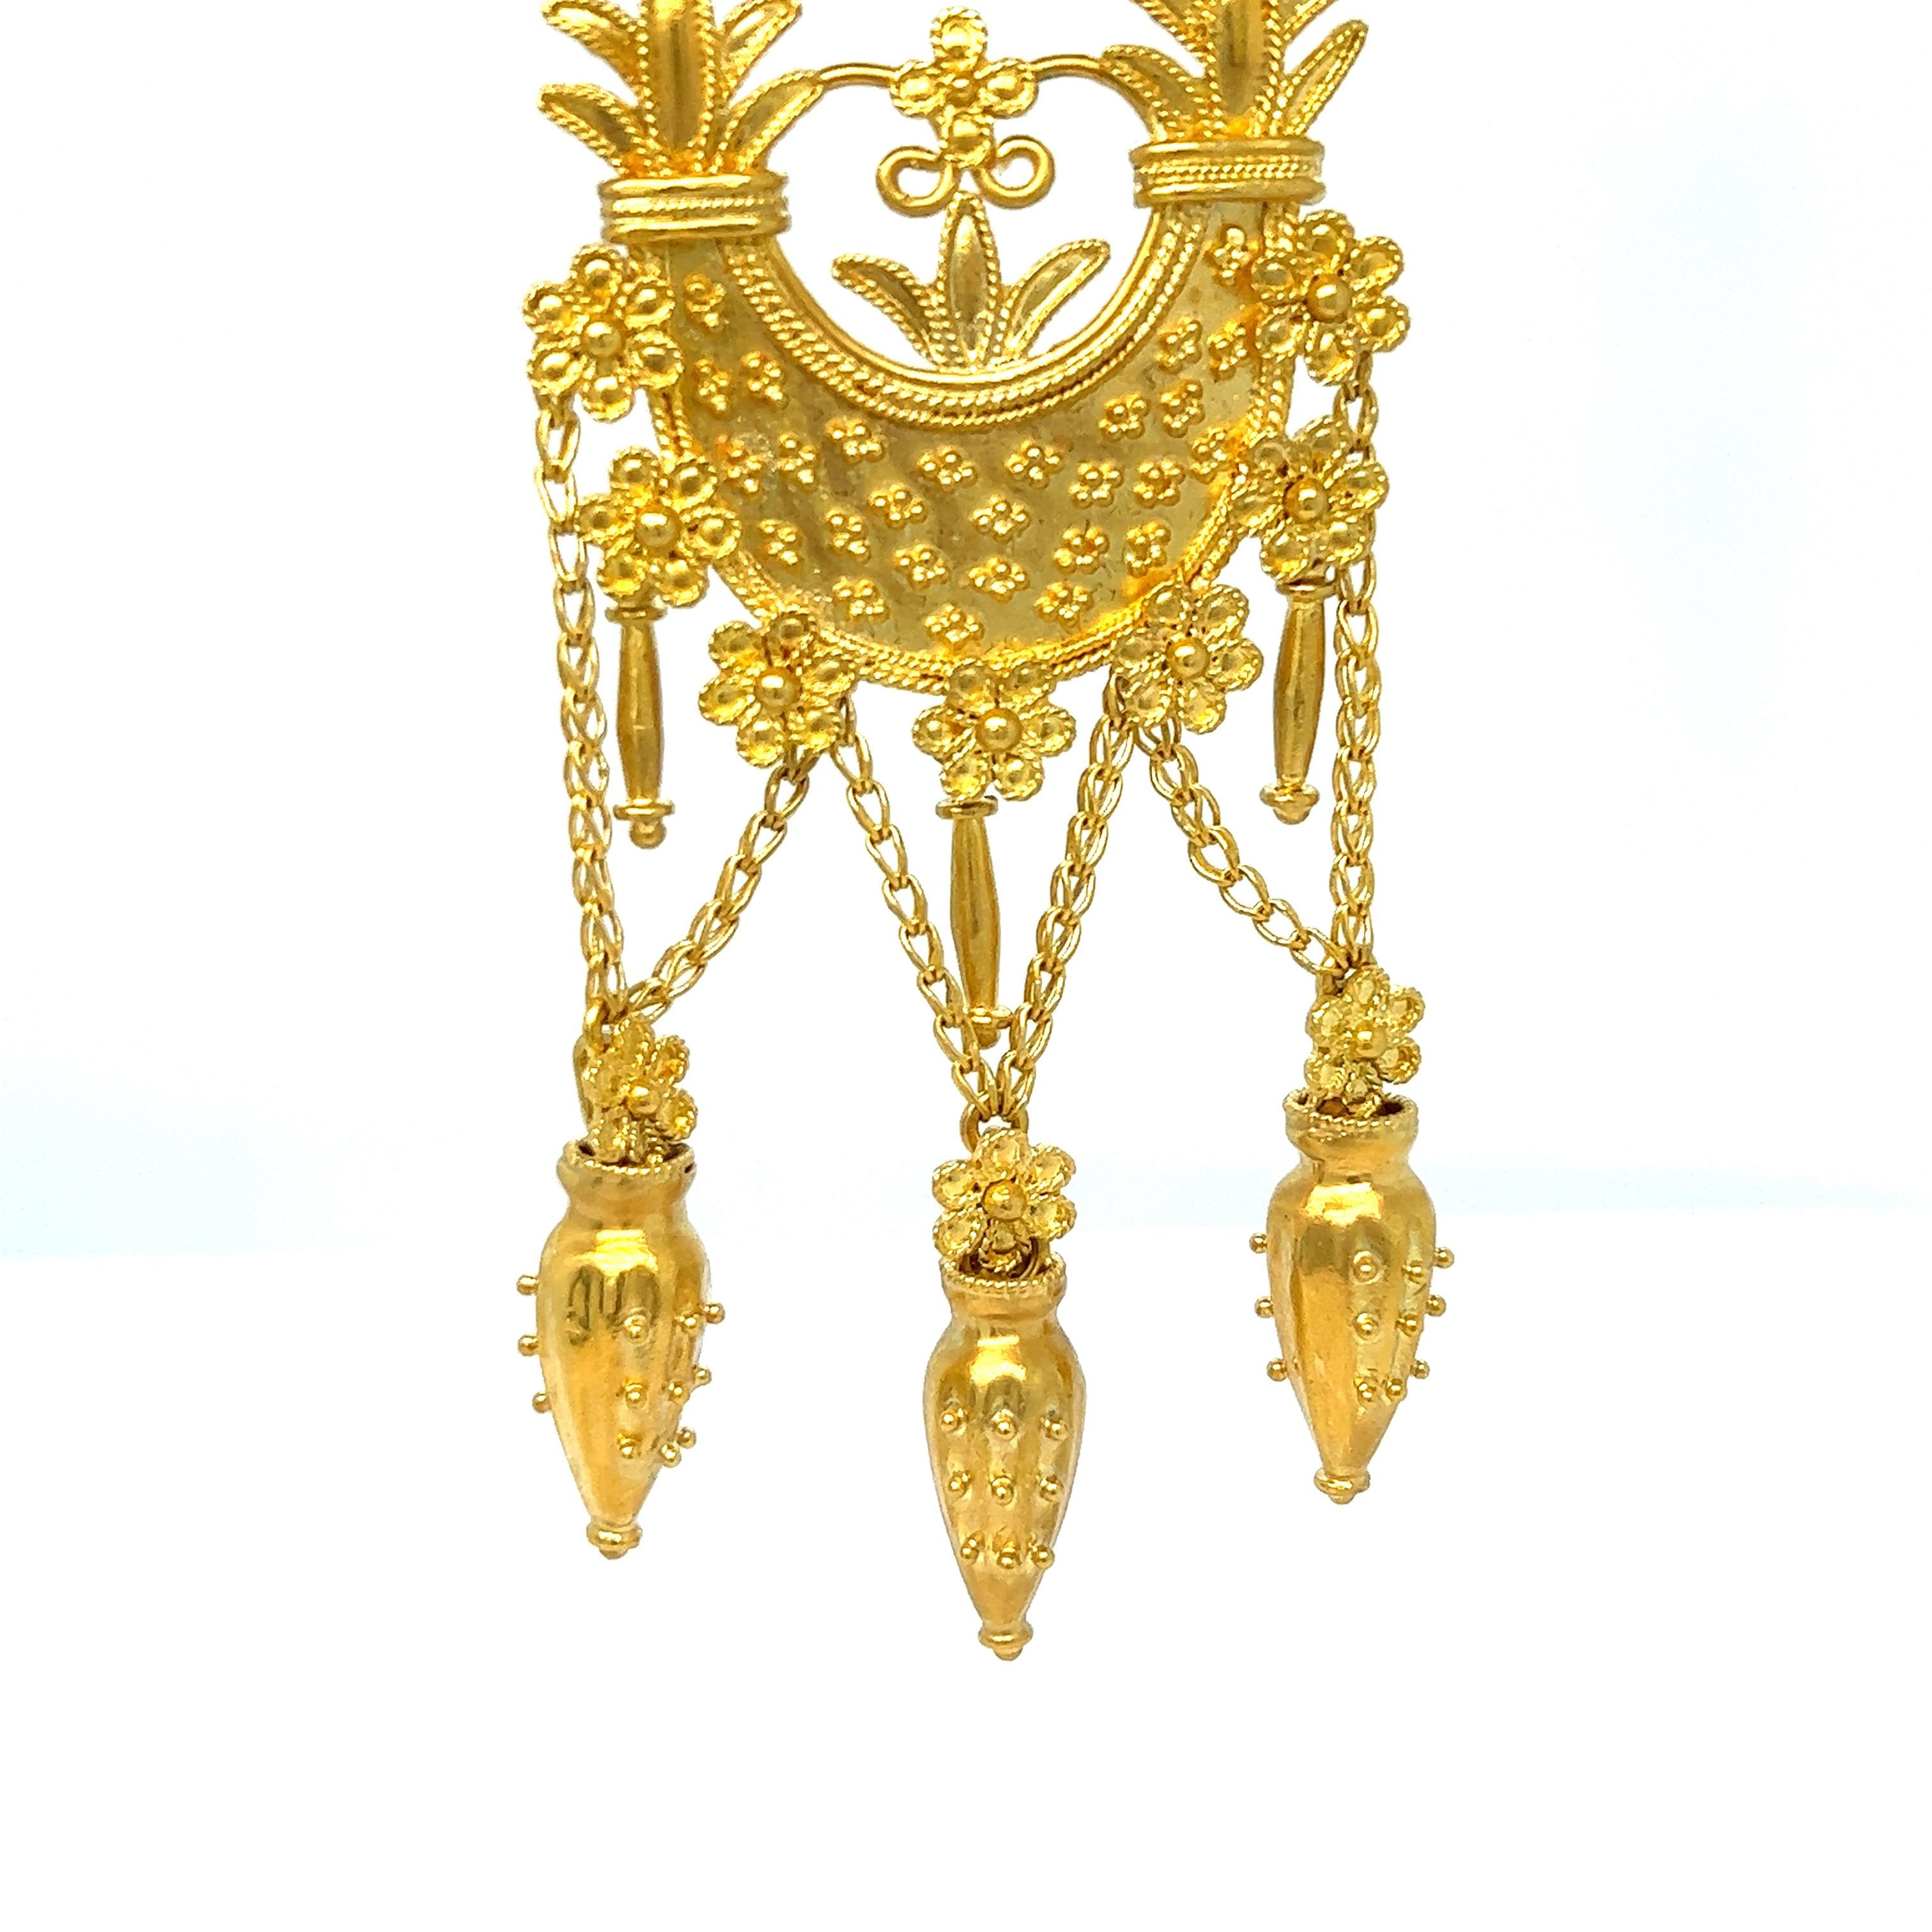 Gold Etruscan Revival Dangling Pendant Brooch In Excellent Condition For Sale In New York, NY